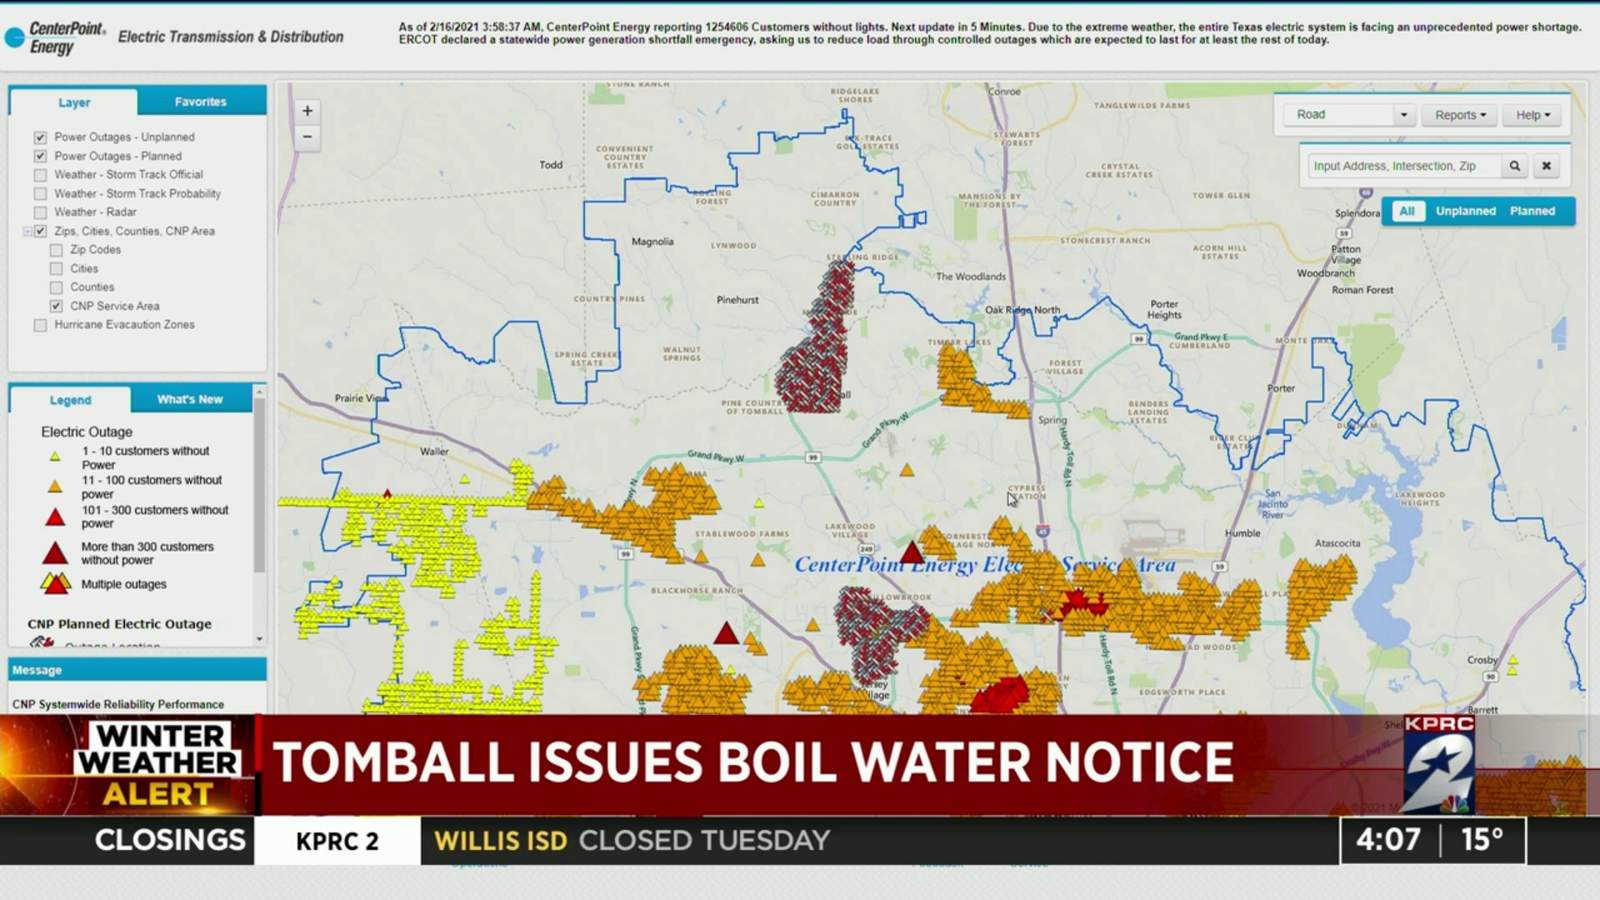 Tomball issues boil water notice due to reduced distribution system pressure